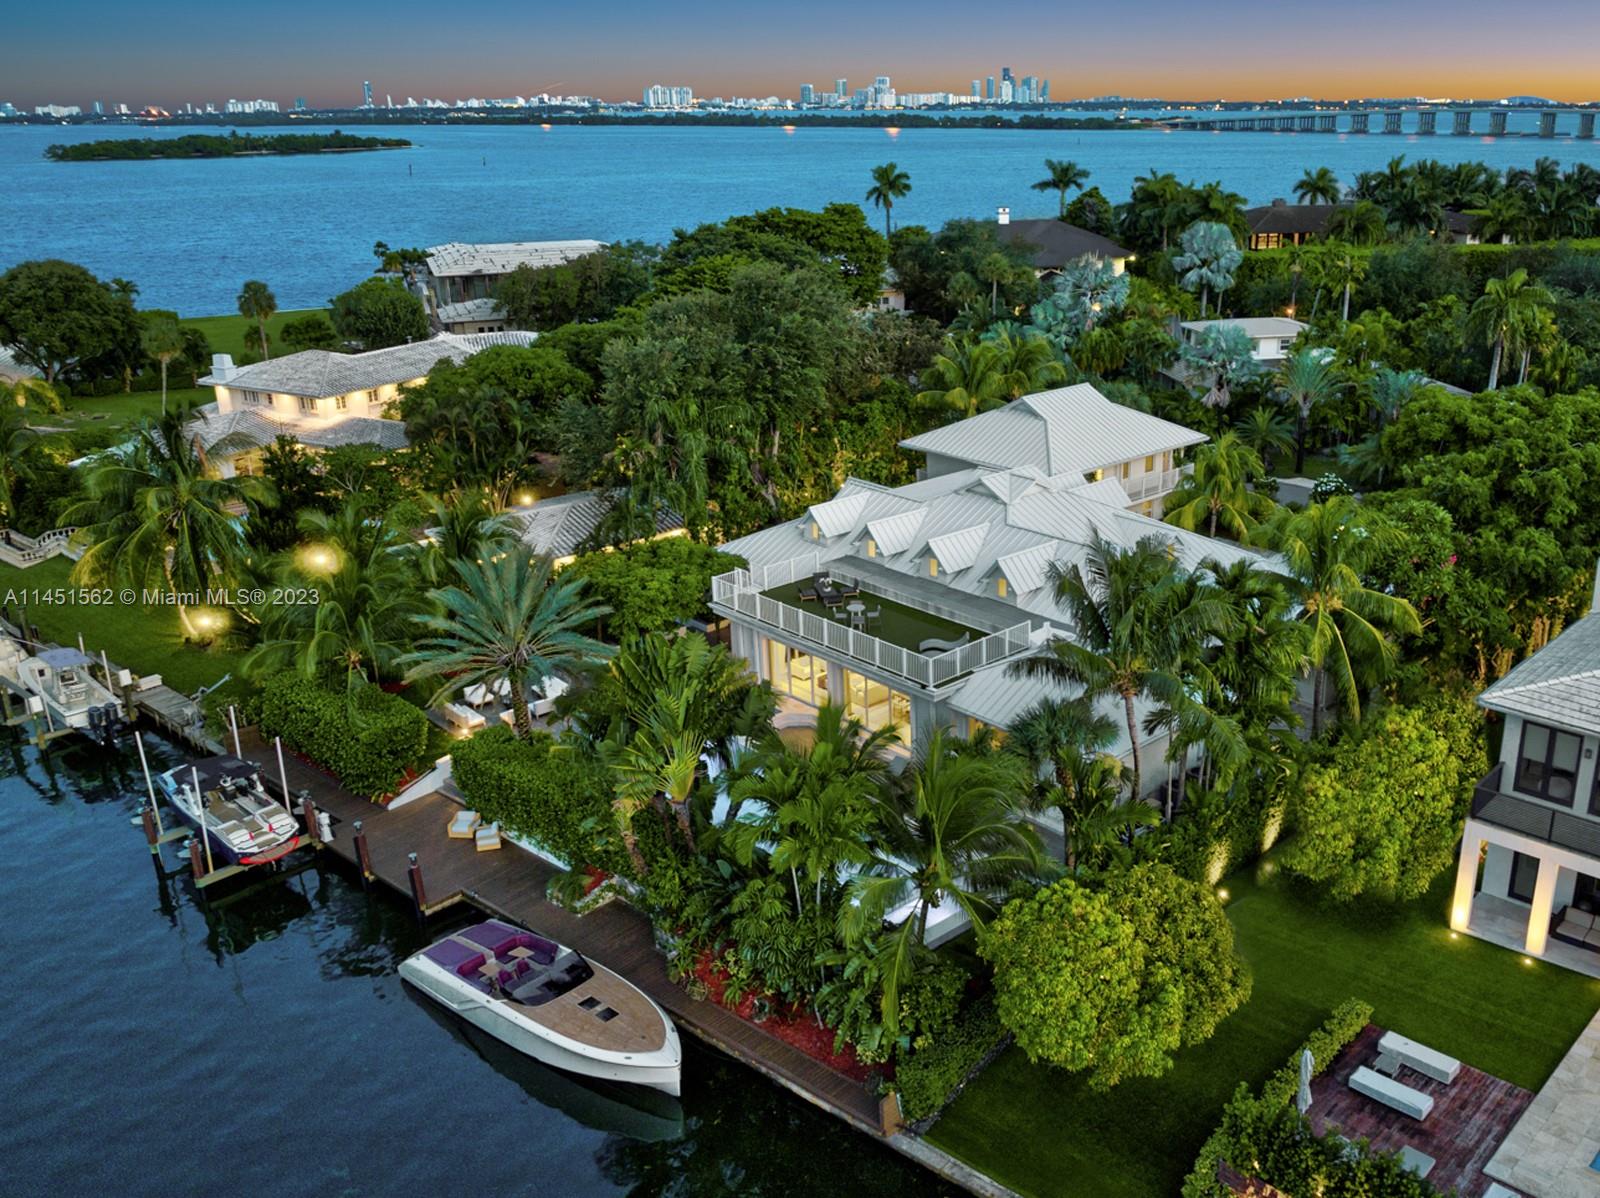 Welcome to Casa Aqua! This boater’s dream modern-Island waterfront residence boasts 120 ft of water frontage with a spacious dock and a lift to fit 2 boats. Sitting on an oversized 20,124 sf lot in the exclusive Island of Miami's truly private gated community of Bay Point, this one story residence with high end finishes throughout, features a sought-after light-filled open floor plan, vaulted ceilings, 7 bedrooms, 6.5 bathrooms, gourmet kitchen with top-of-the-line appliances, private family room, and a bonus room. The spacious Master Suite features 2 walking closets, morning bar, and master bathroom in Carrara marble. Exteriors are ideal to entertain: lushly landscaped backyard with oversize pool, jacuzzi, sunken bar, and rooftop terrace. 2-car garage & generator, and private motor court.